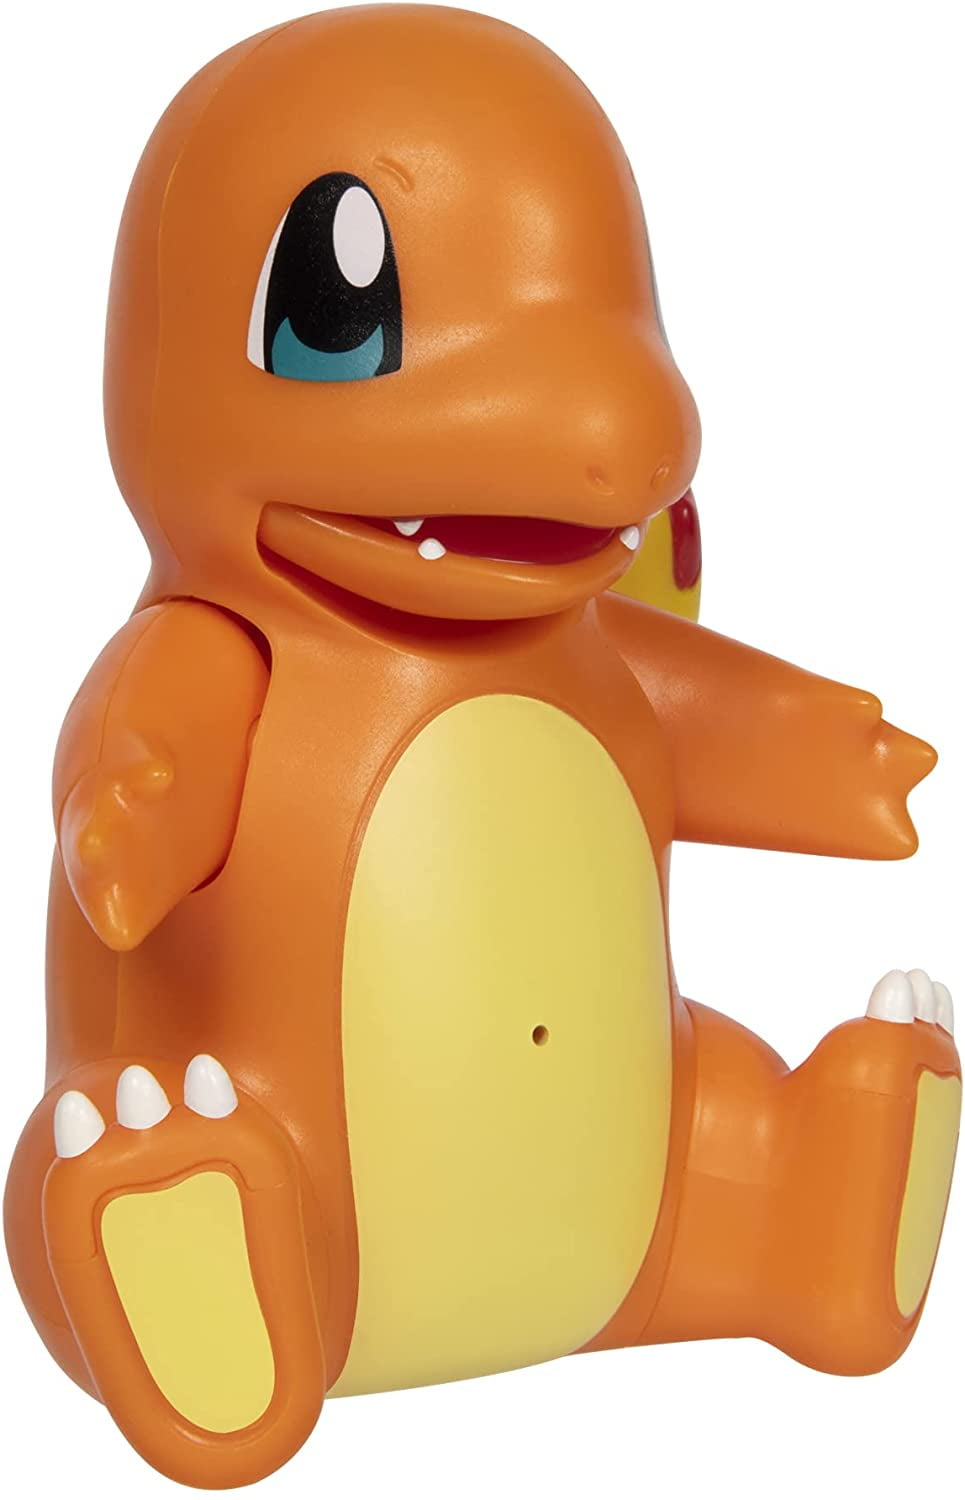  Pokémon 10 Flame Action Charmander Plush - Interactive with  Lights & Fire Sounds - Light Up Tail & Mouth with Multiple Sound Effects  and Voices - Officially Licensed - Great Gift